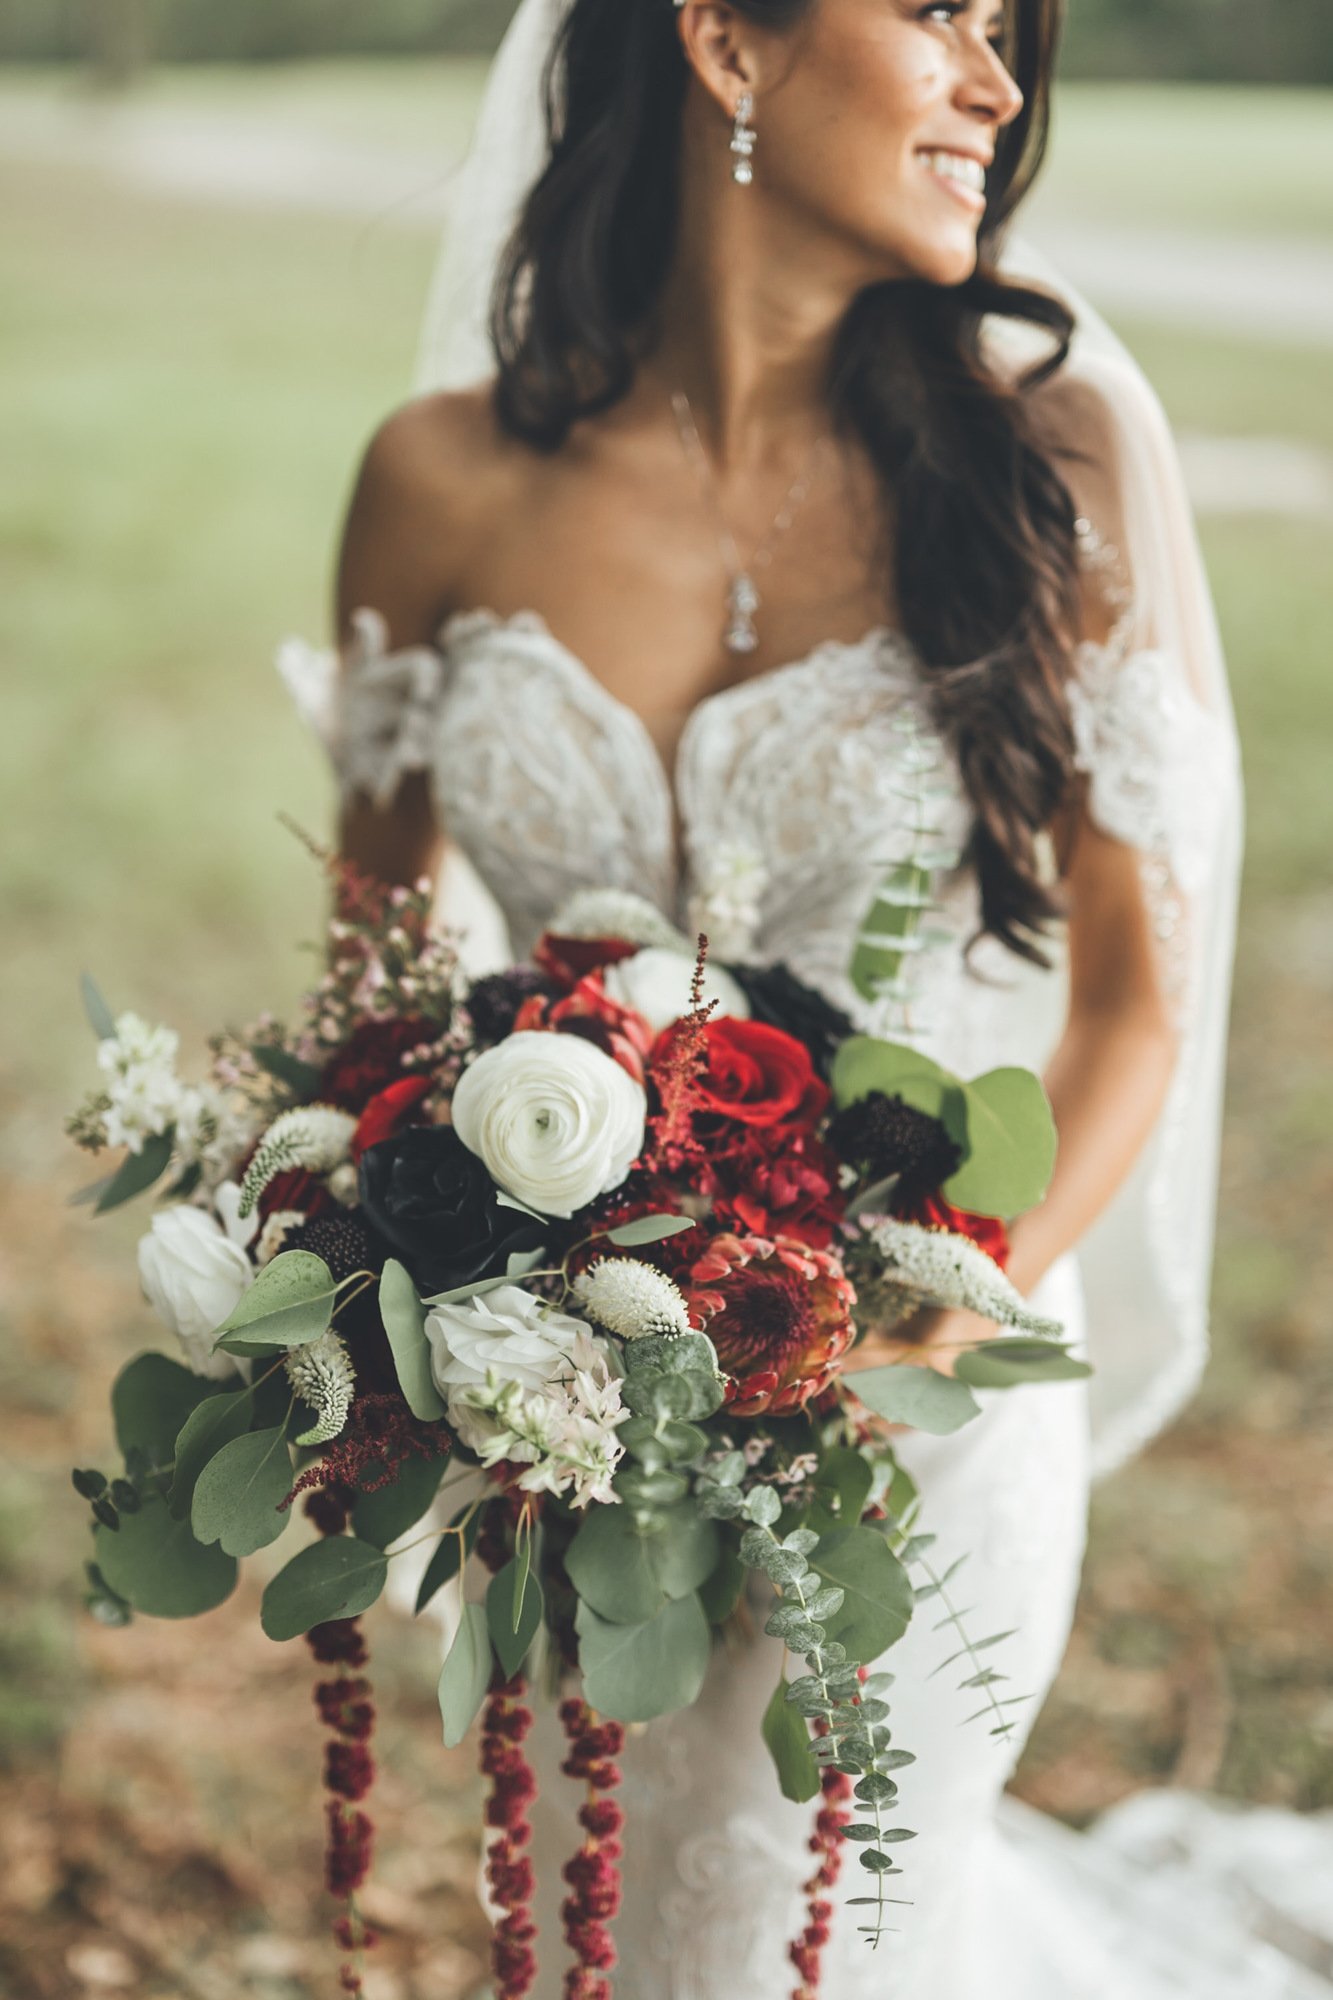 Bow Tie Photo & Video floral bouquet from wedding couple in St. Augustine, FL.jpg